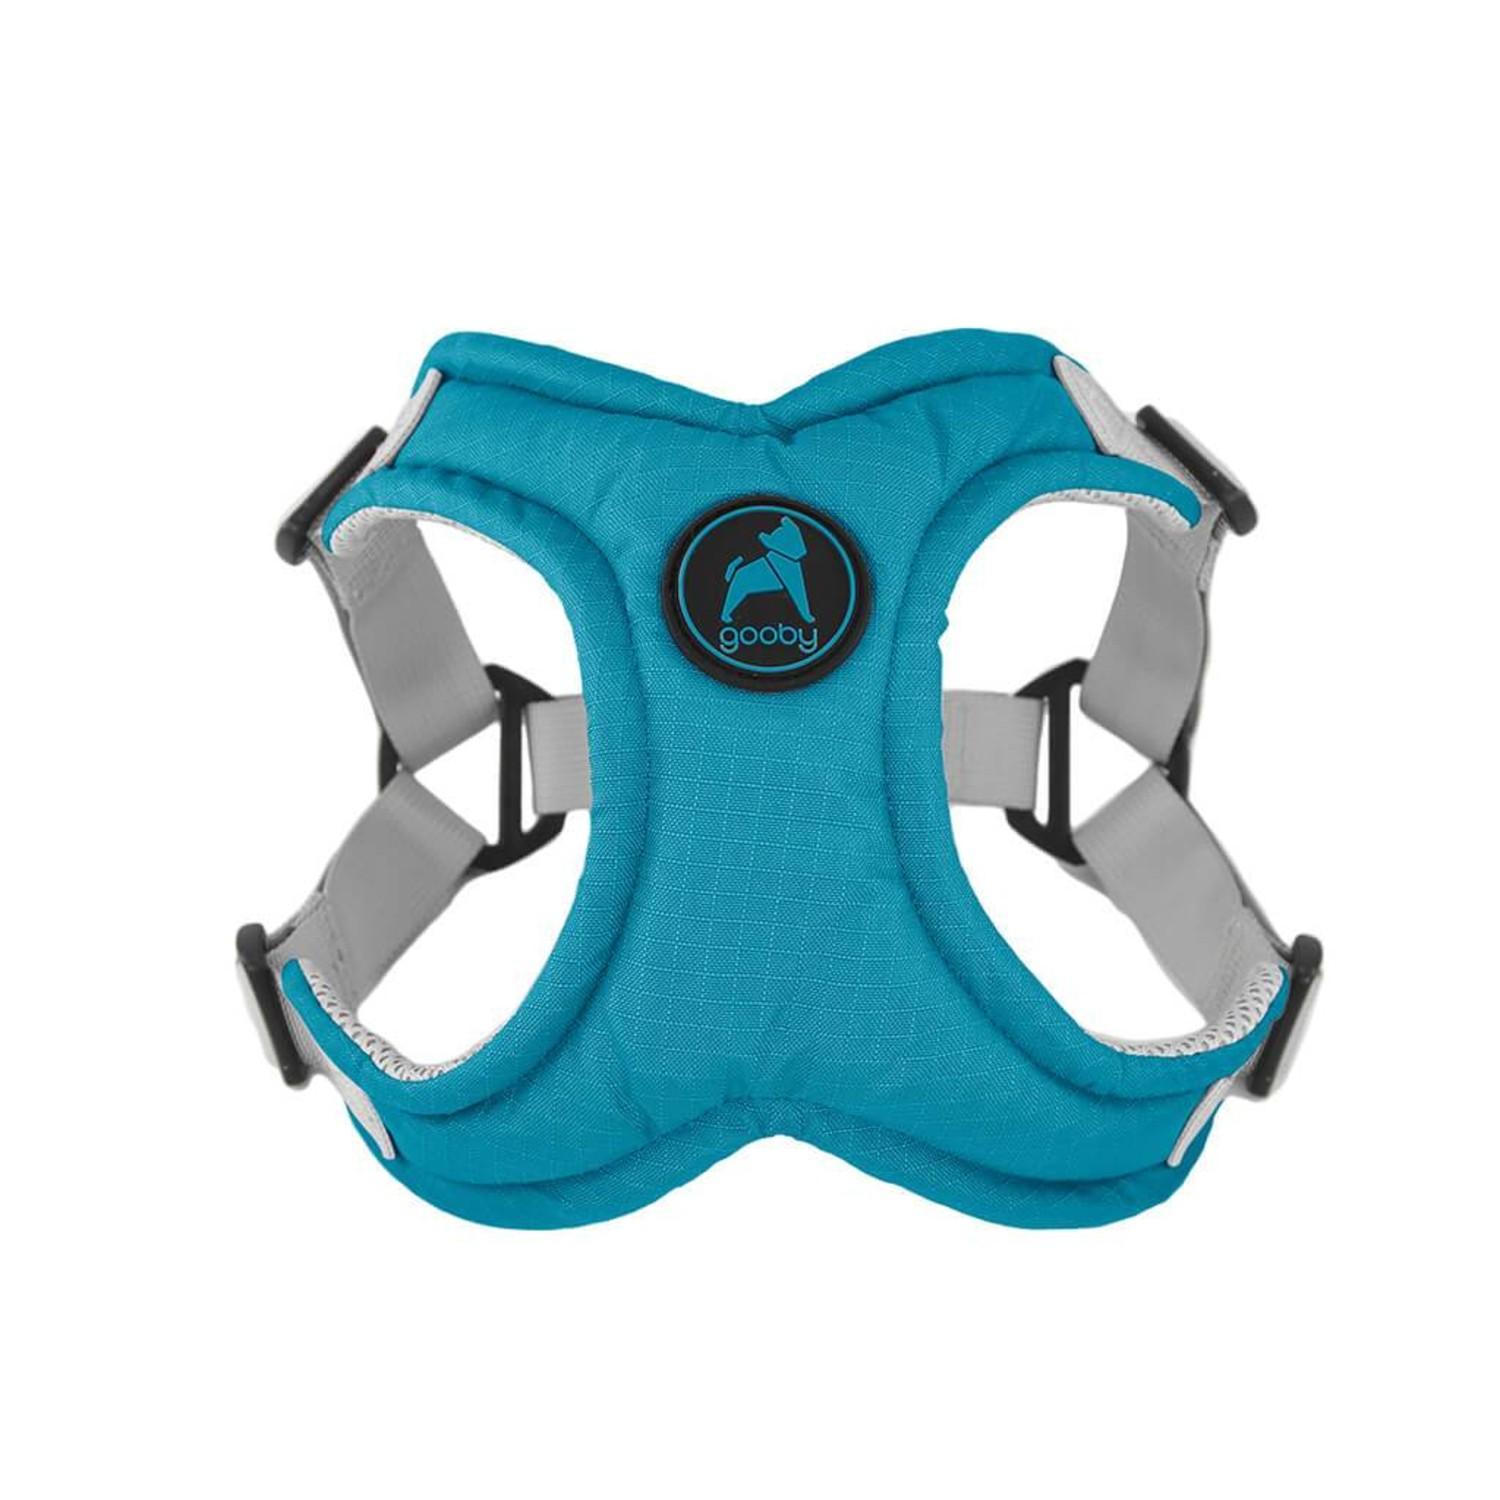 Gooby Memory Foam Step-in Dog Harness - Turquoise